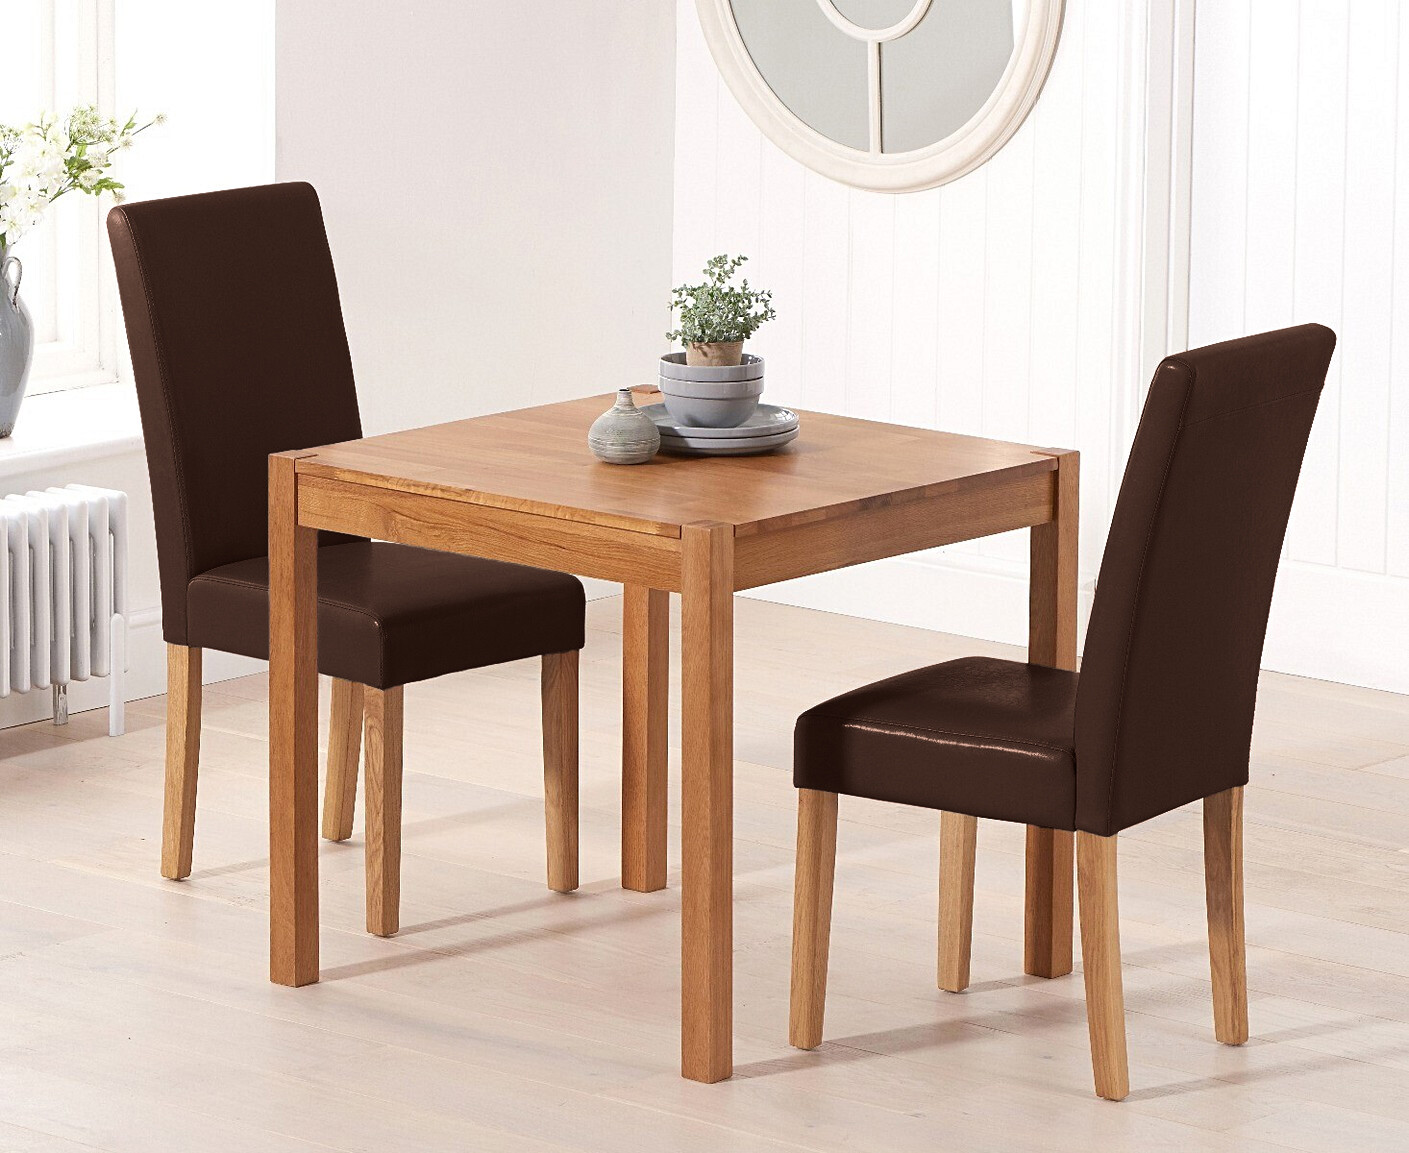 York 80cm Solid Oak Dining Table With 2 Brown Olivia Chairs